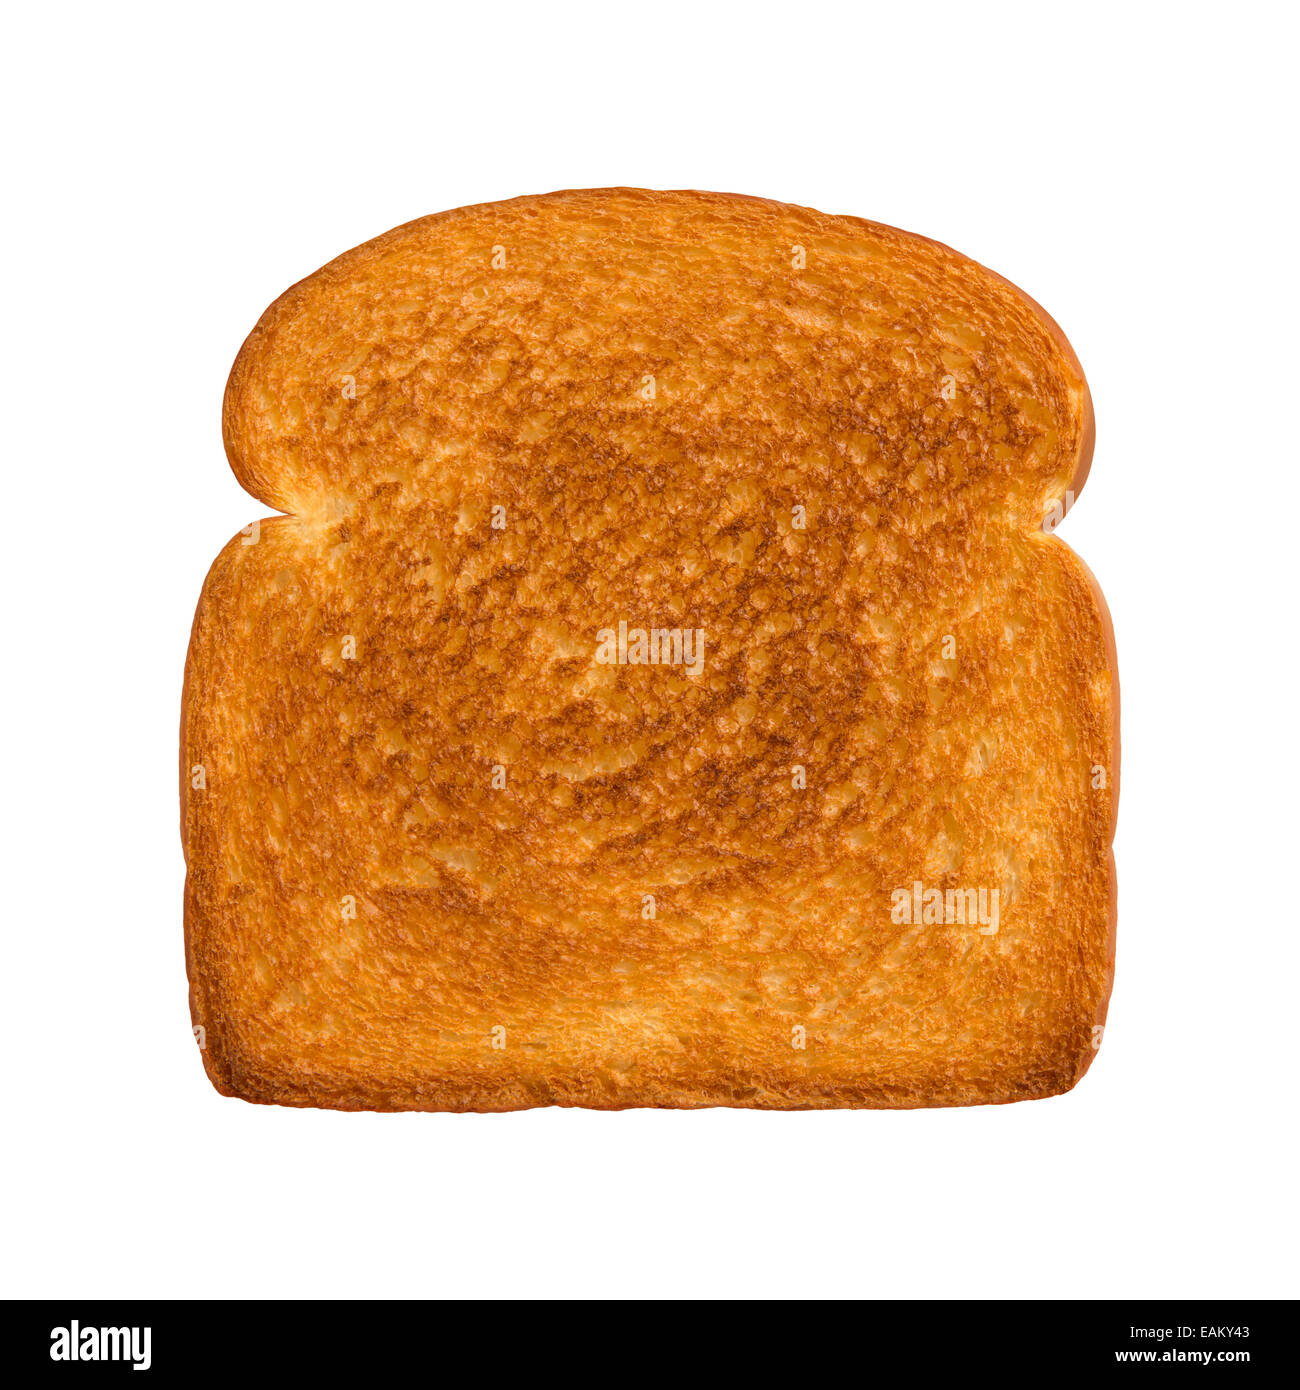 Aerial view of a single slice of toasted white bread. Stock Photo